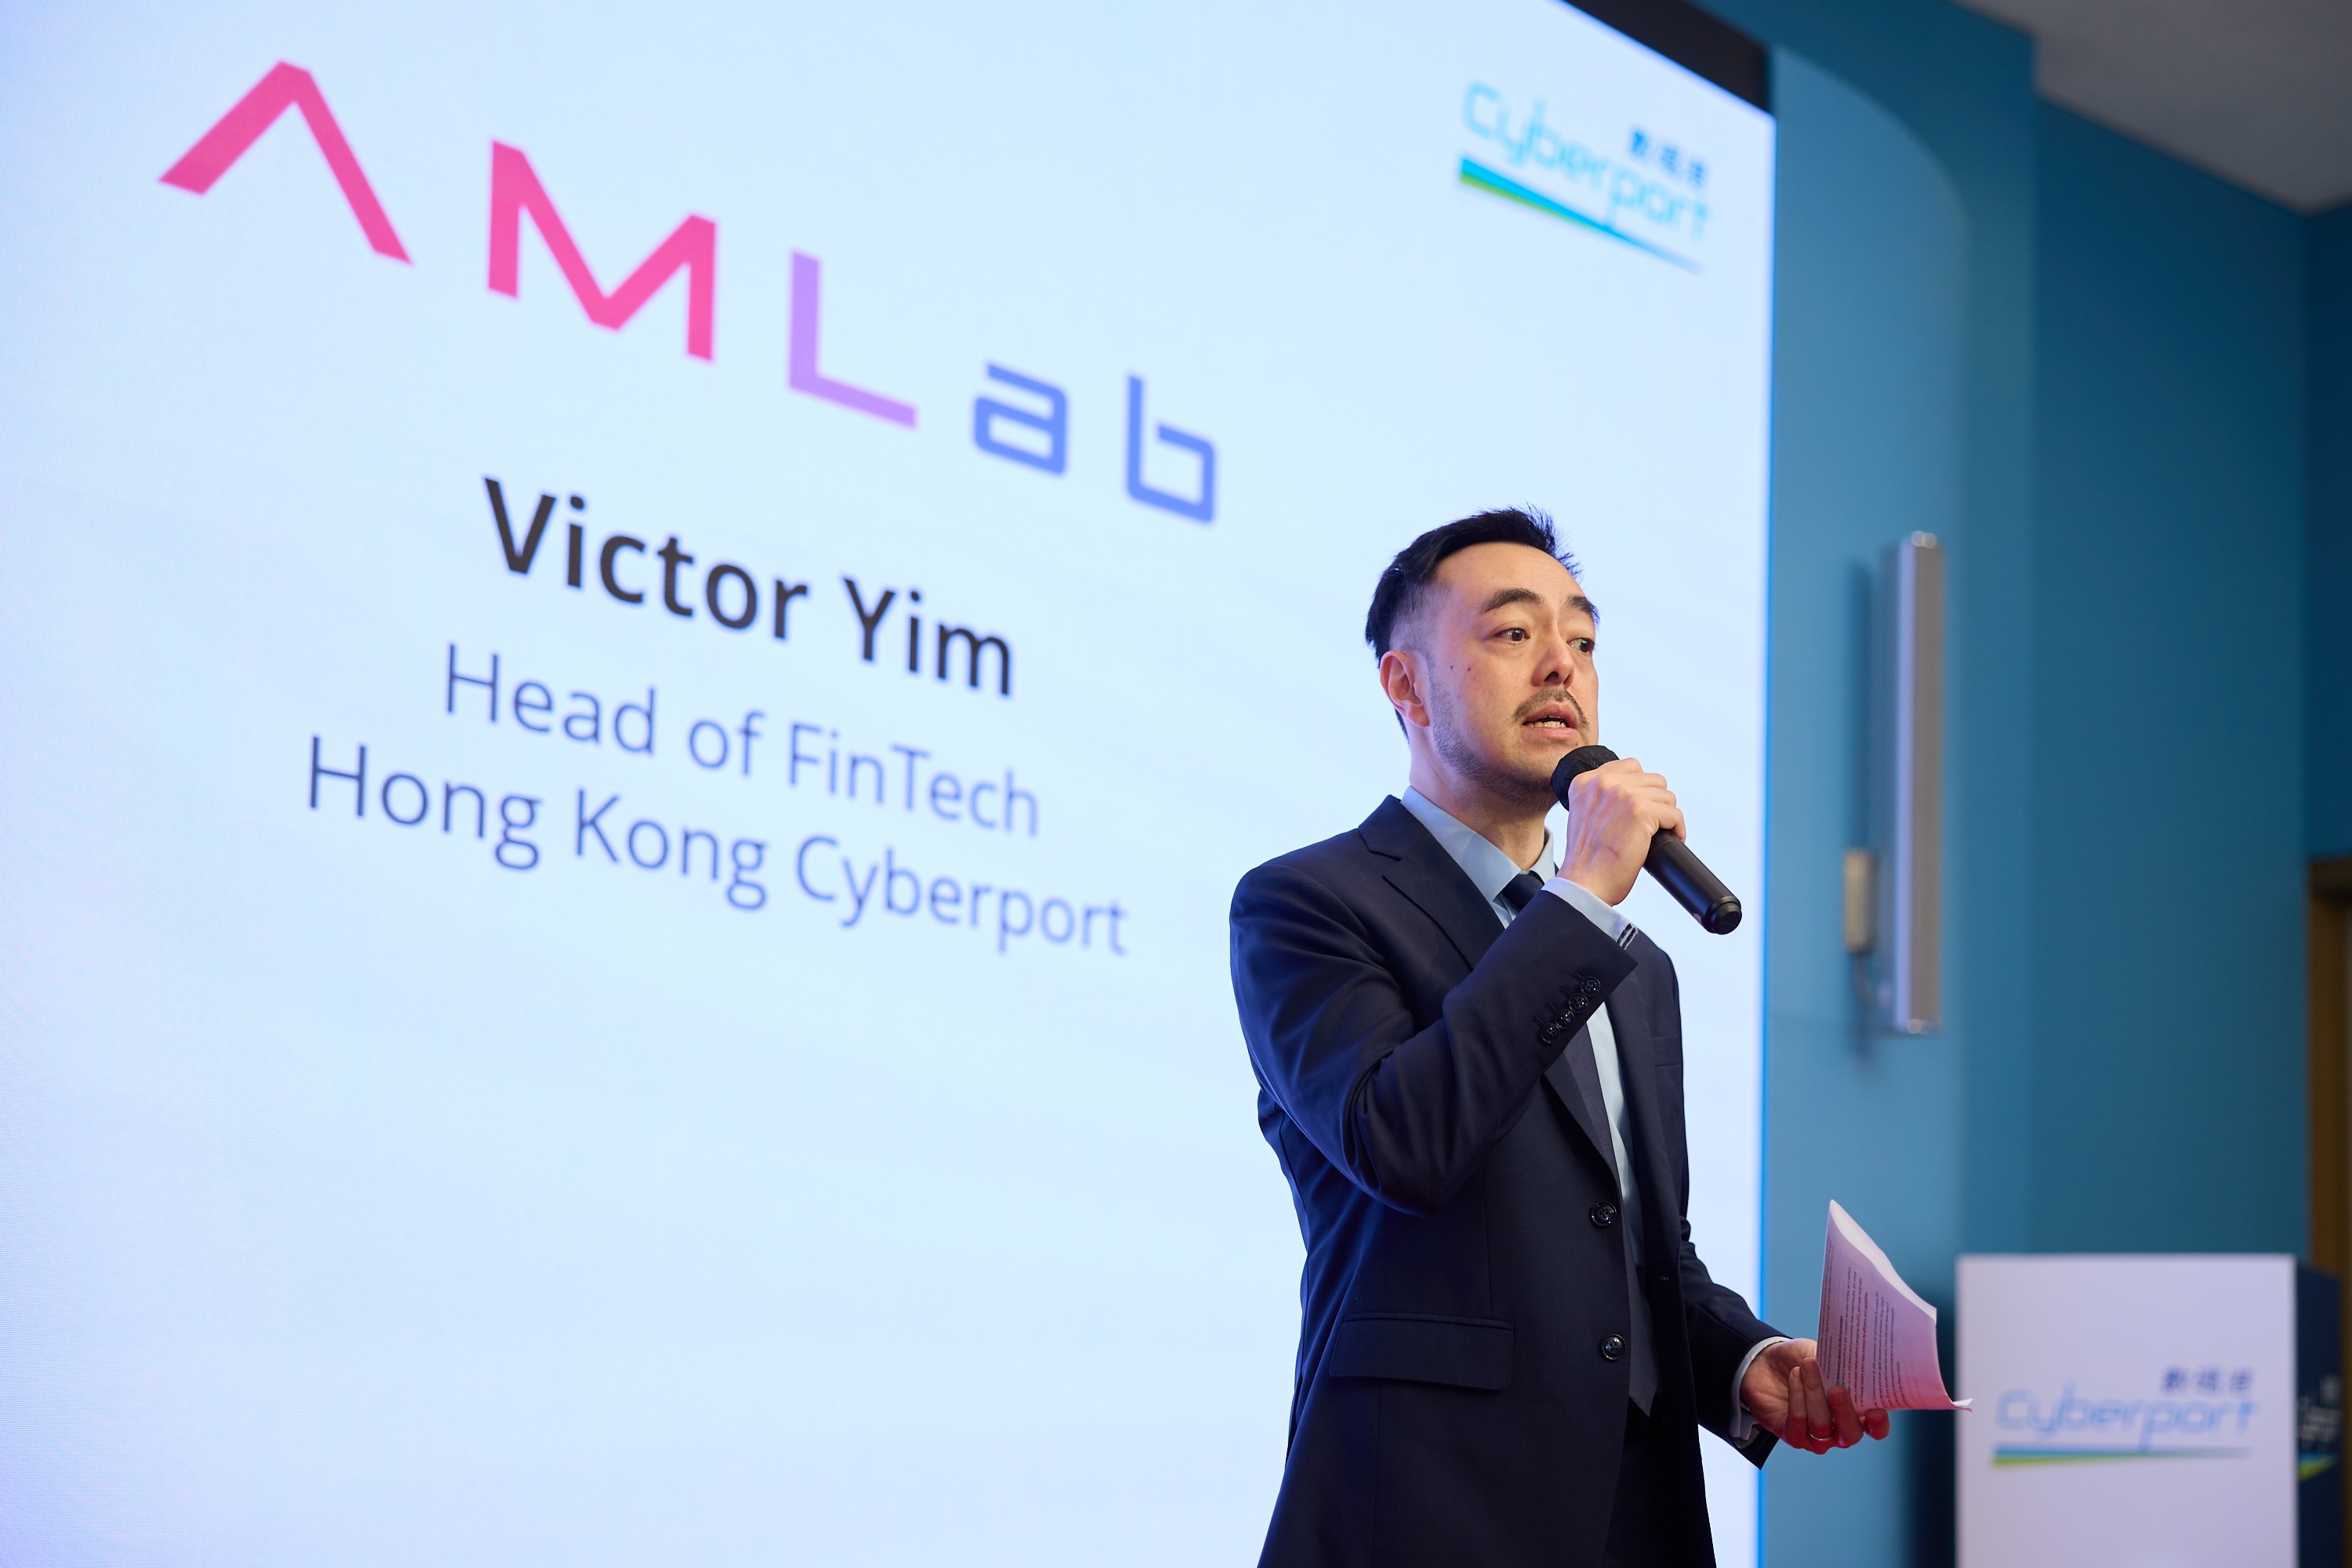 Mr Victor Yim, Head of FinTech of the Cyberport delivers remarks at AMLab 4 on 7 June.